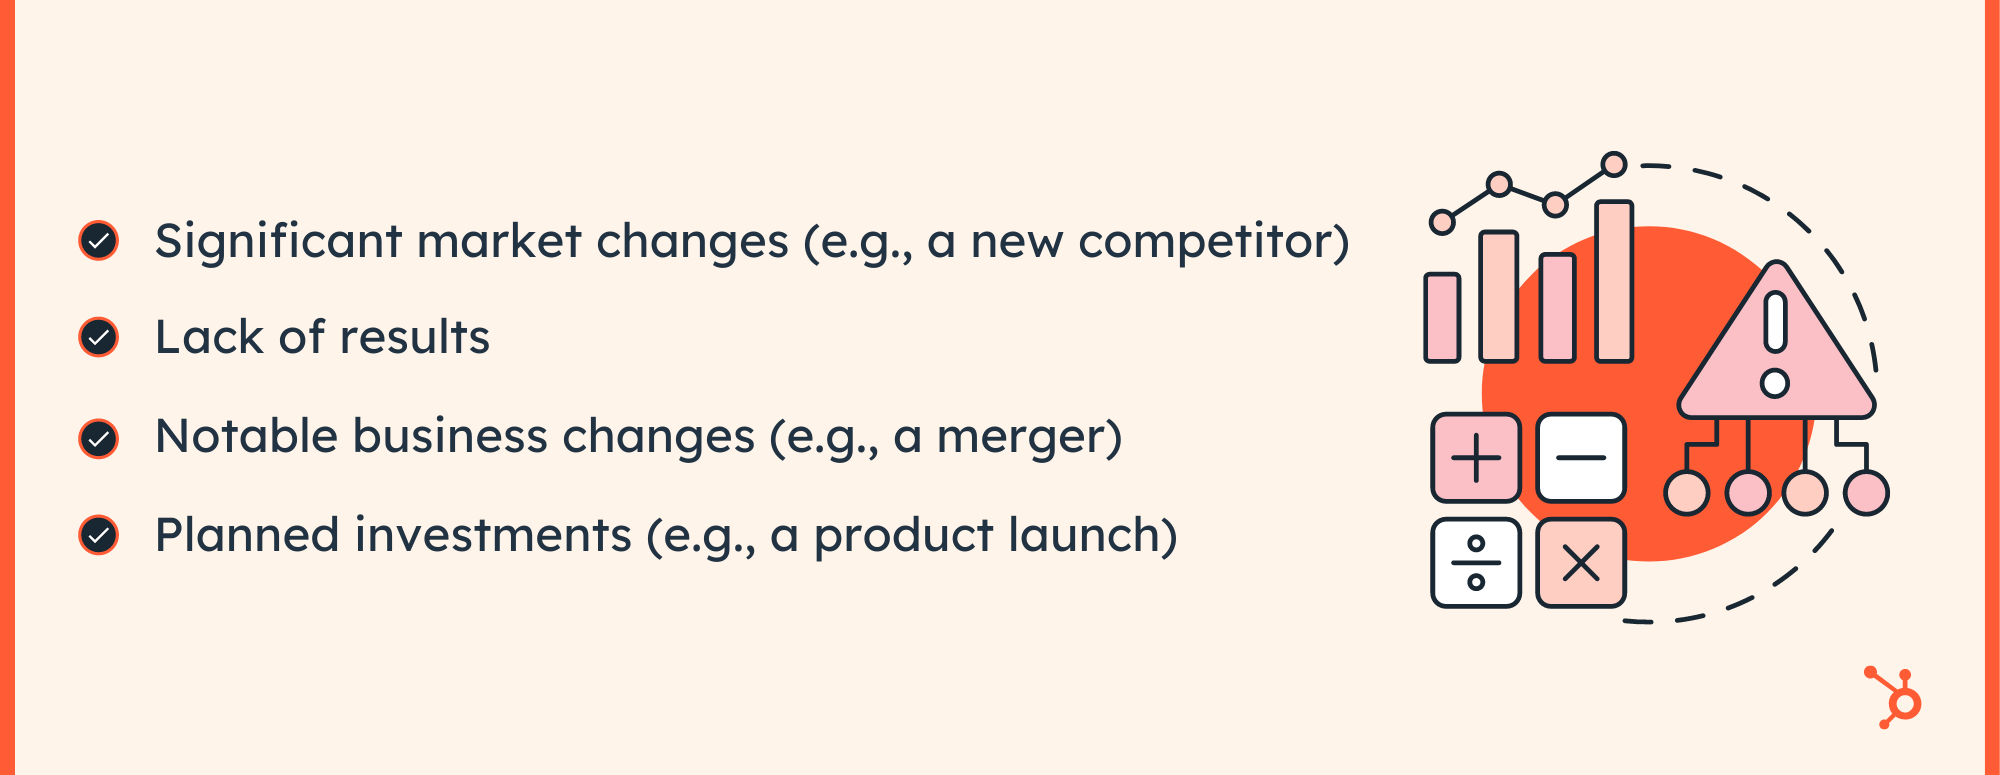 Marketing Audit Triggers: significant market changes (e.g., a new competitor), lack of results, notable business changes (e.g., a merger), and/or planned investments (e.g., a rebrand or new product launch).